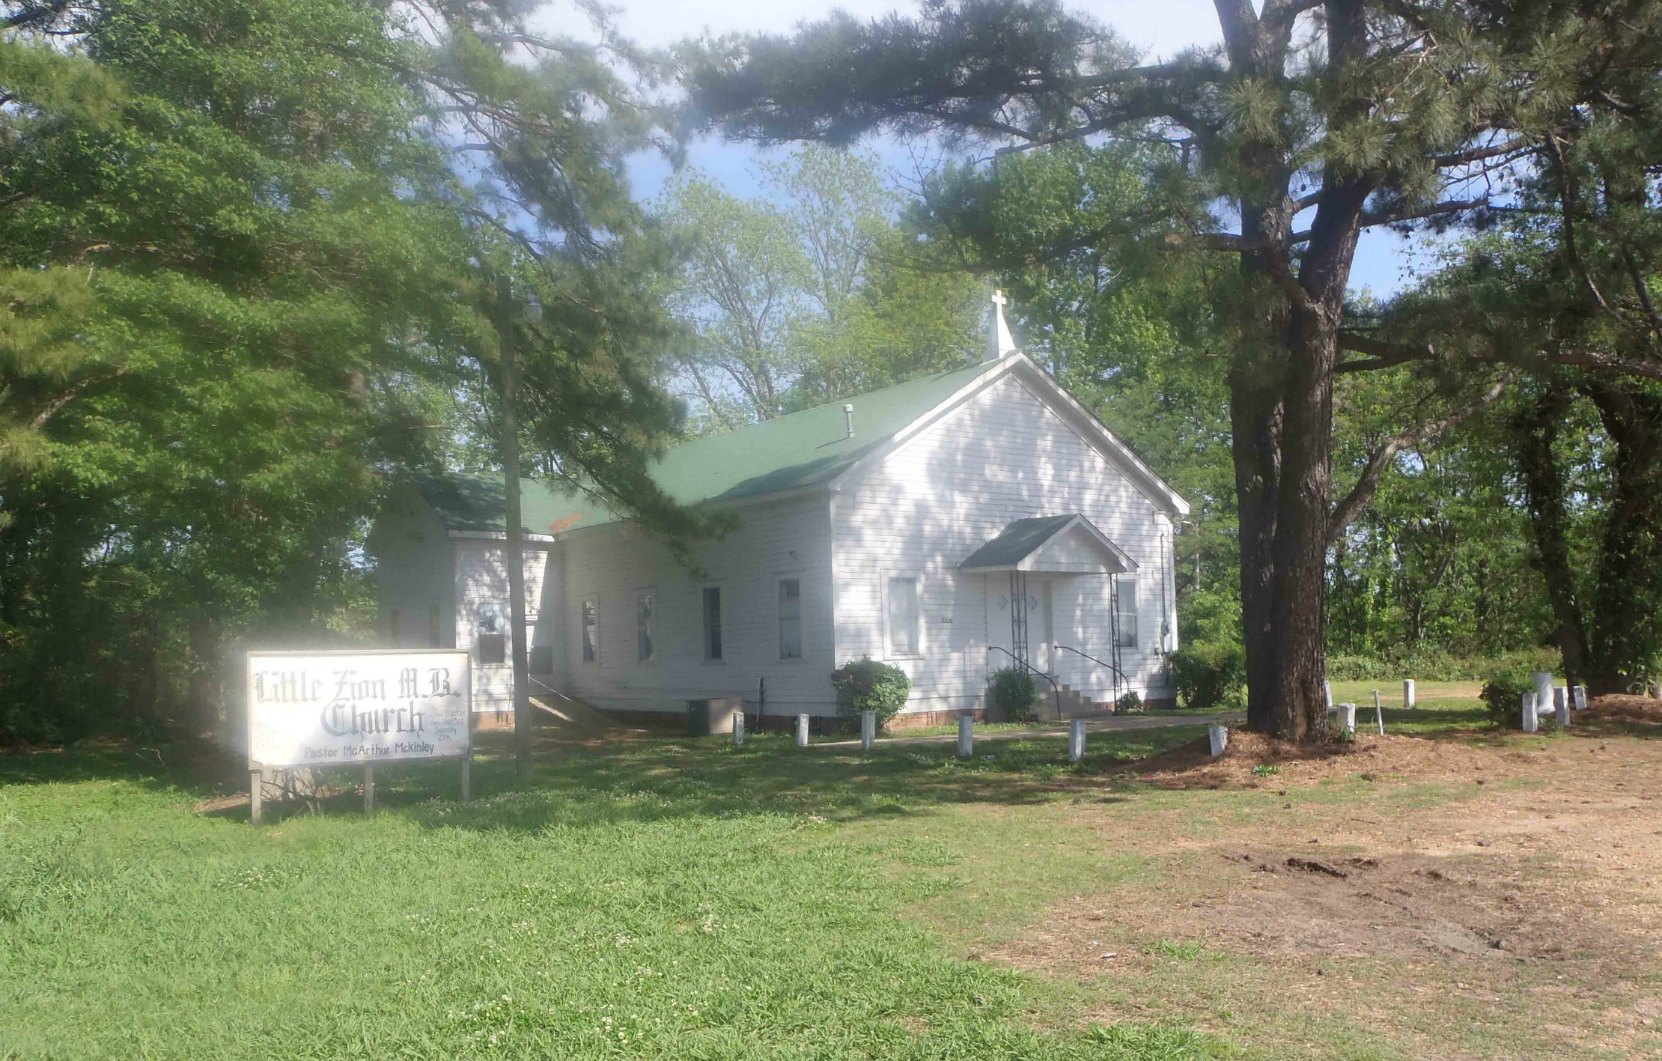 Little Zion Missionary Baptist Church, near Money, Leflore County, Mississippi, site of one of three reputed Robert Johnson grave sites.